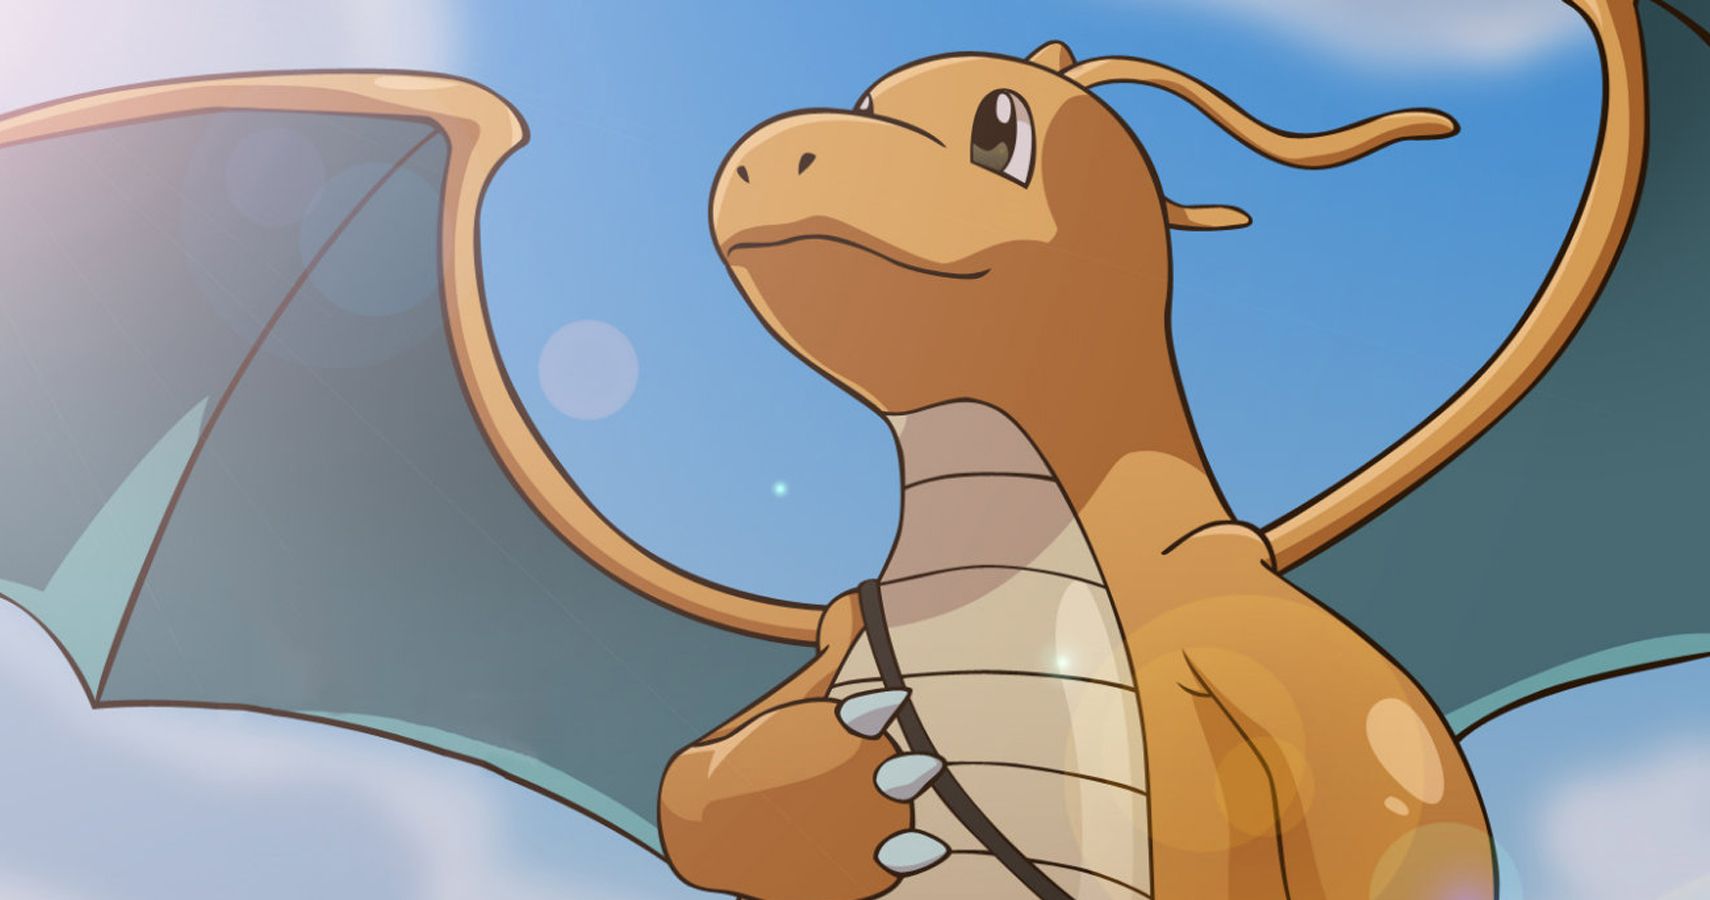 25 Things That Were Cut From The Original Pokémon Games (That Could Have Changed Everything)